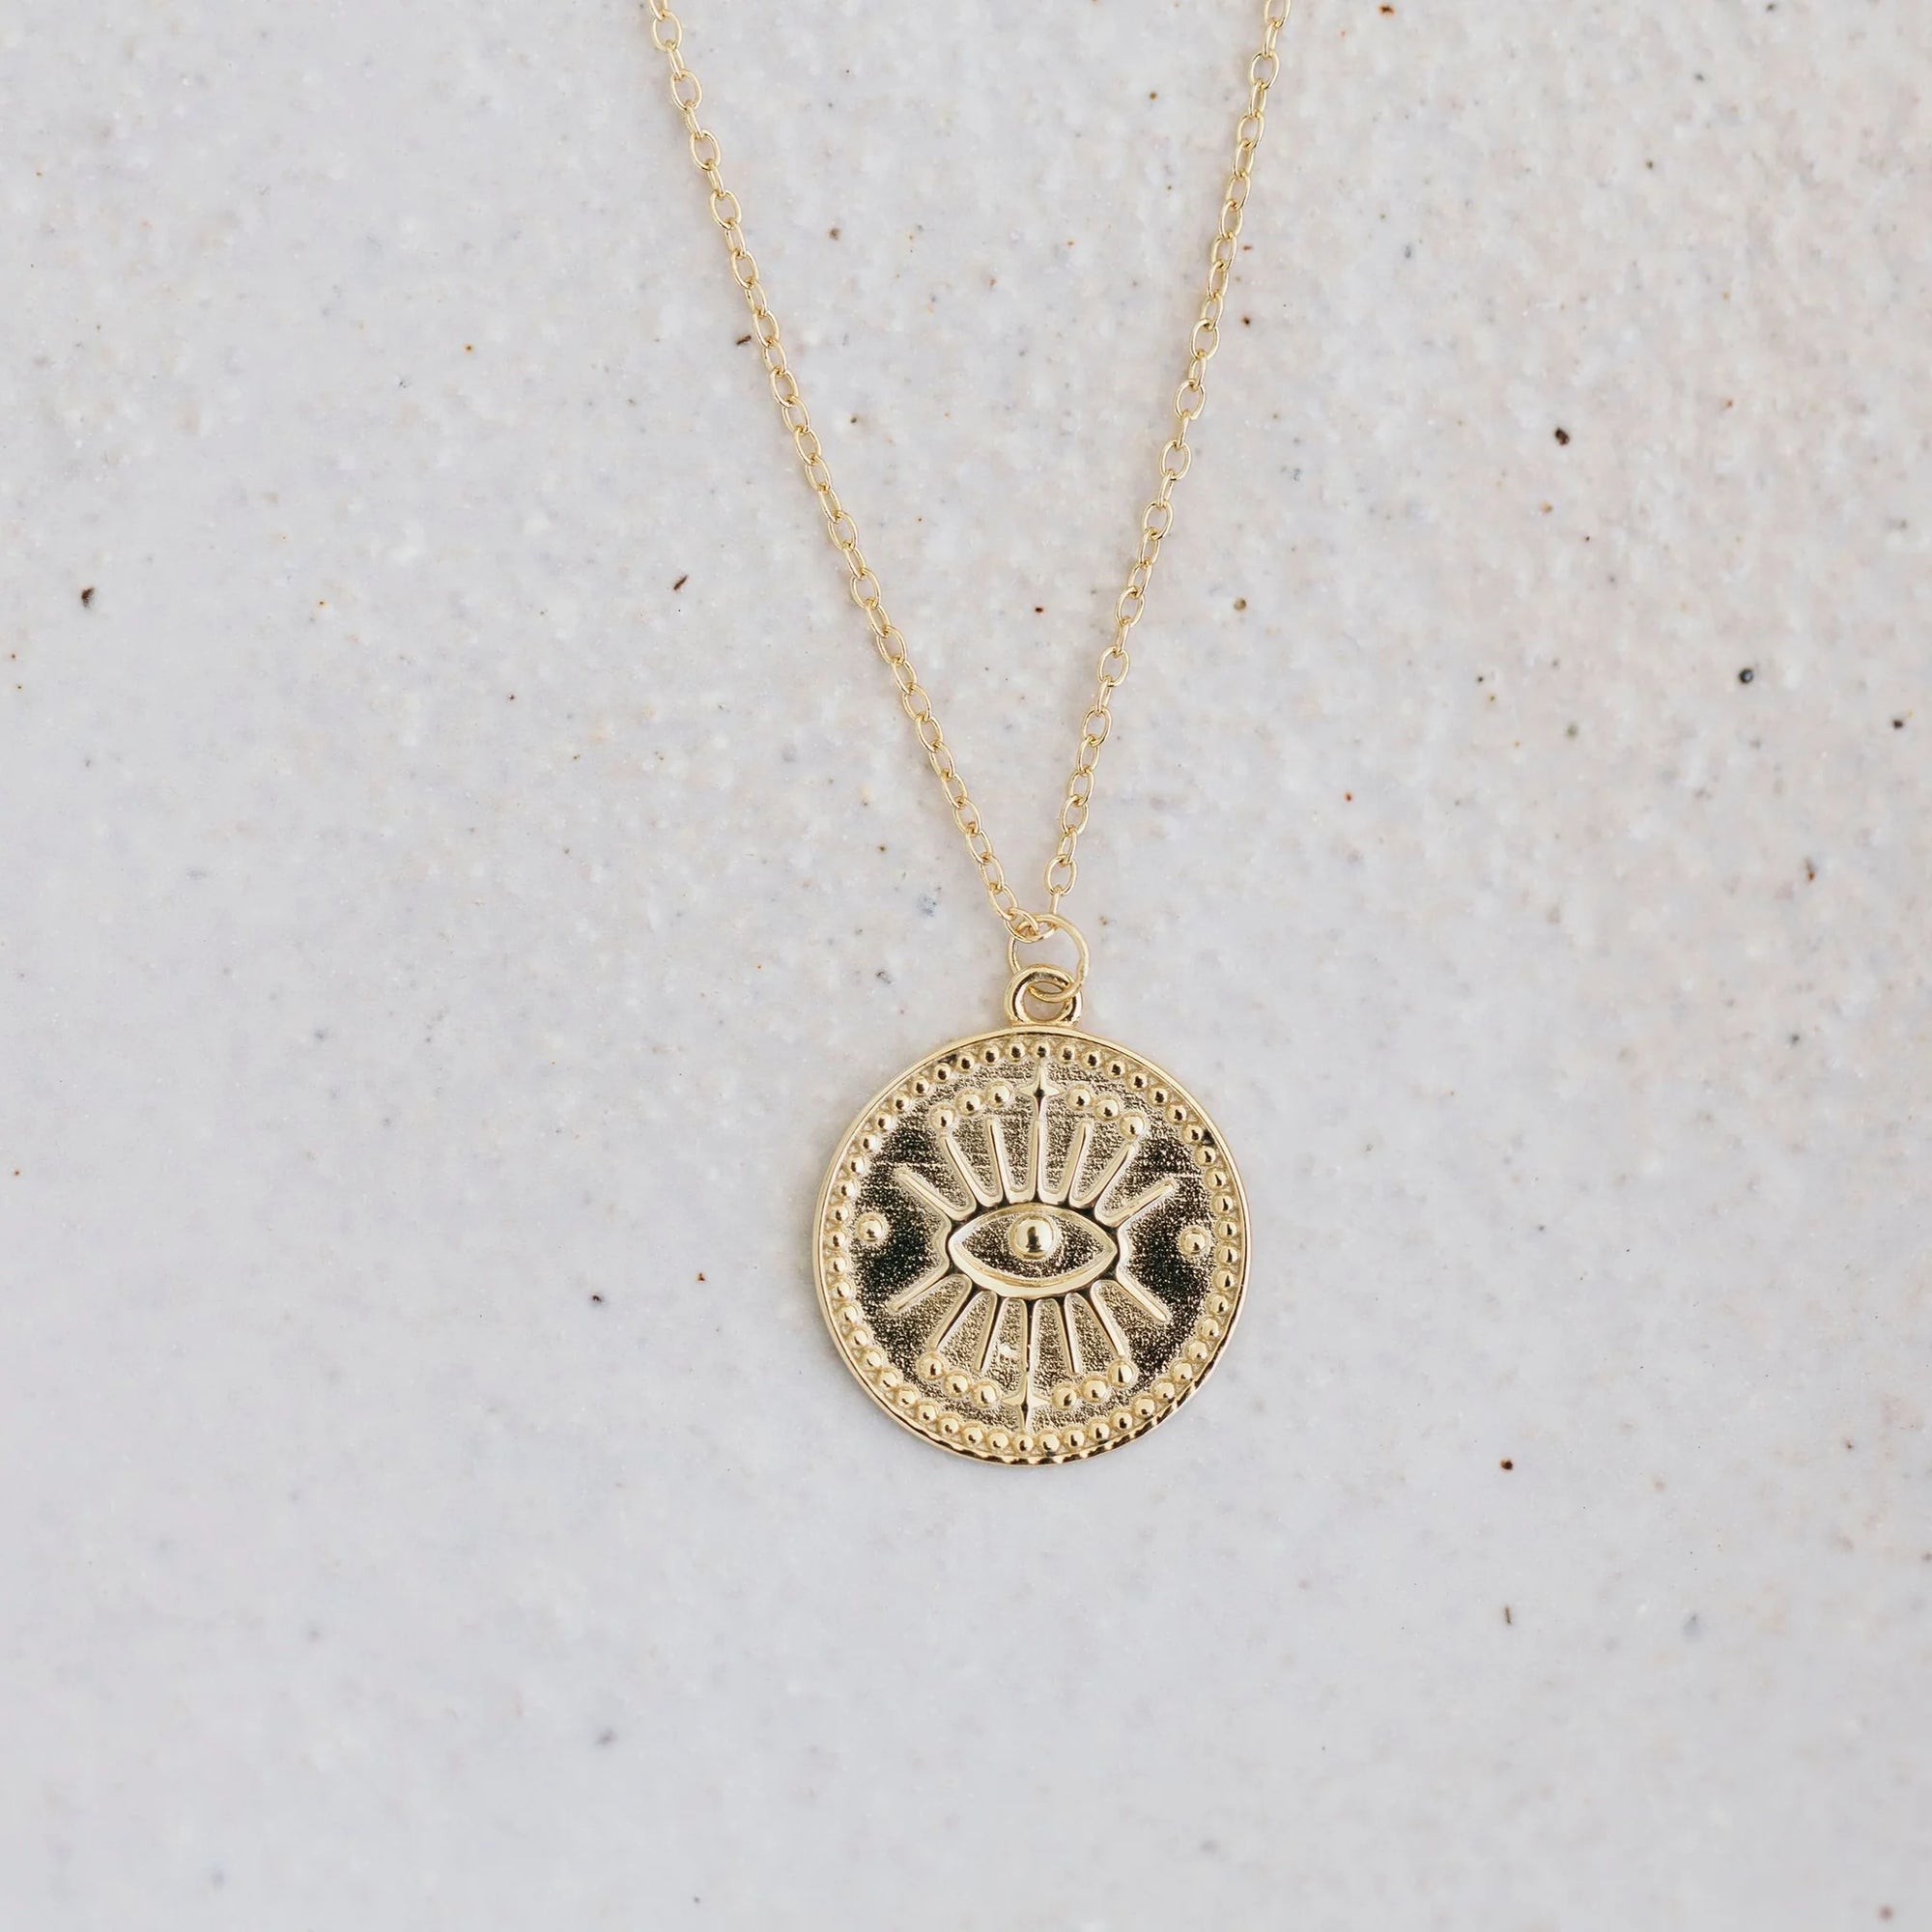 SUN SOUL PROTECTOR NECKLACE: GOLD